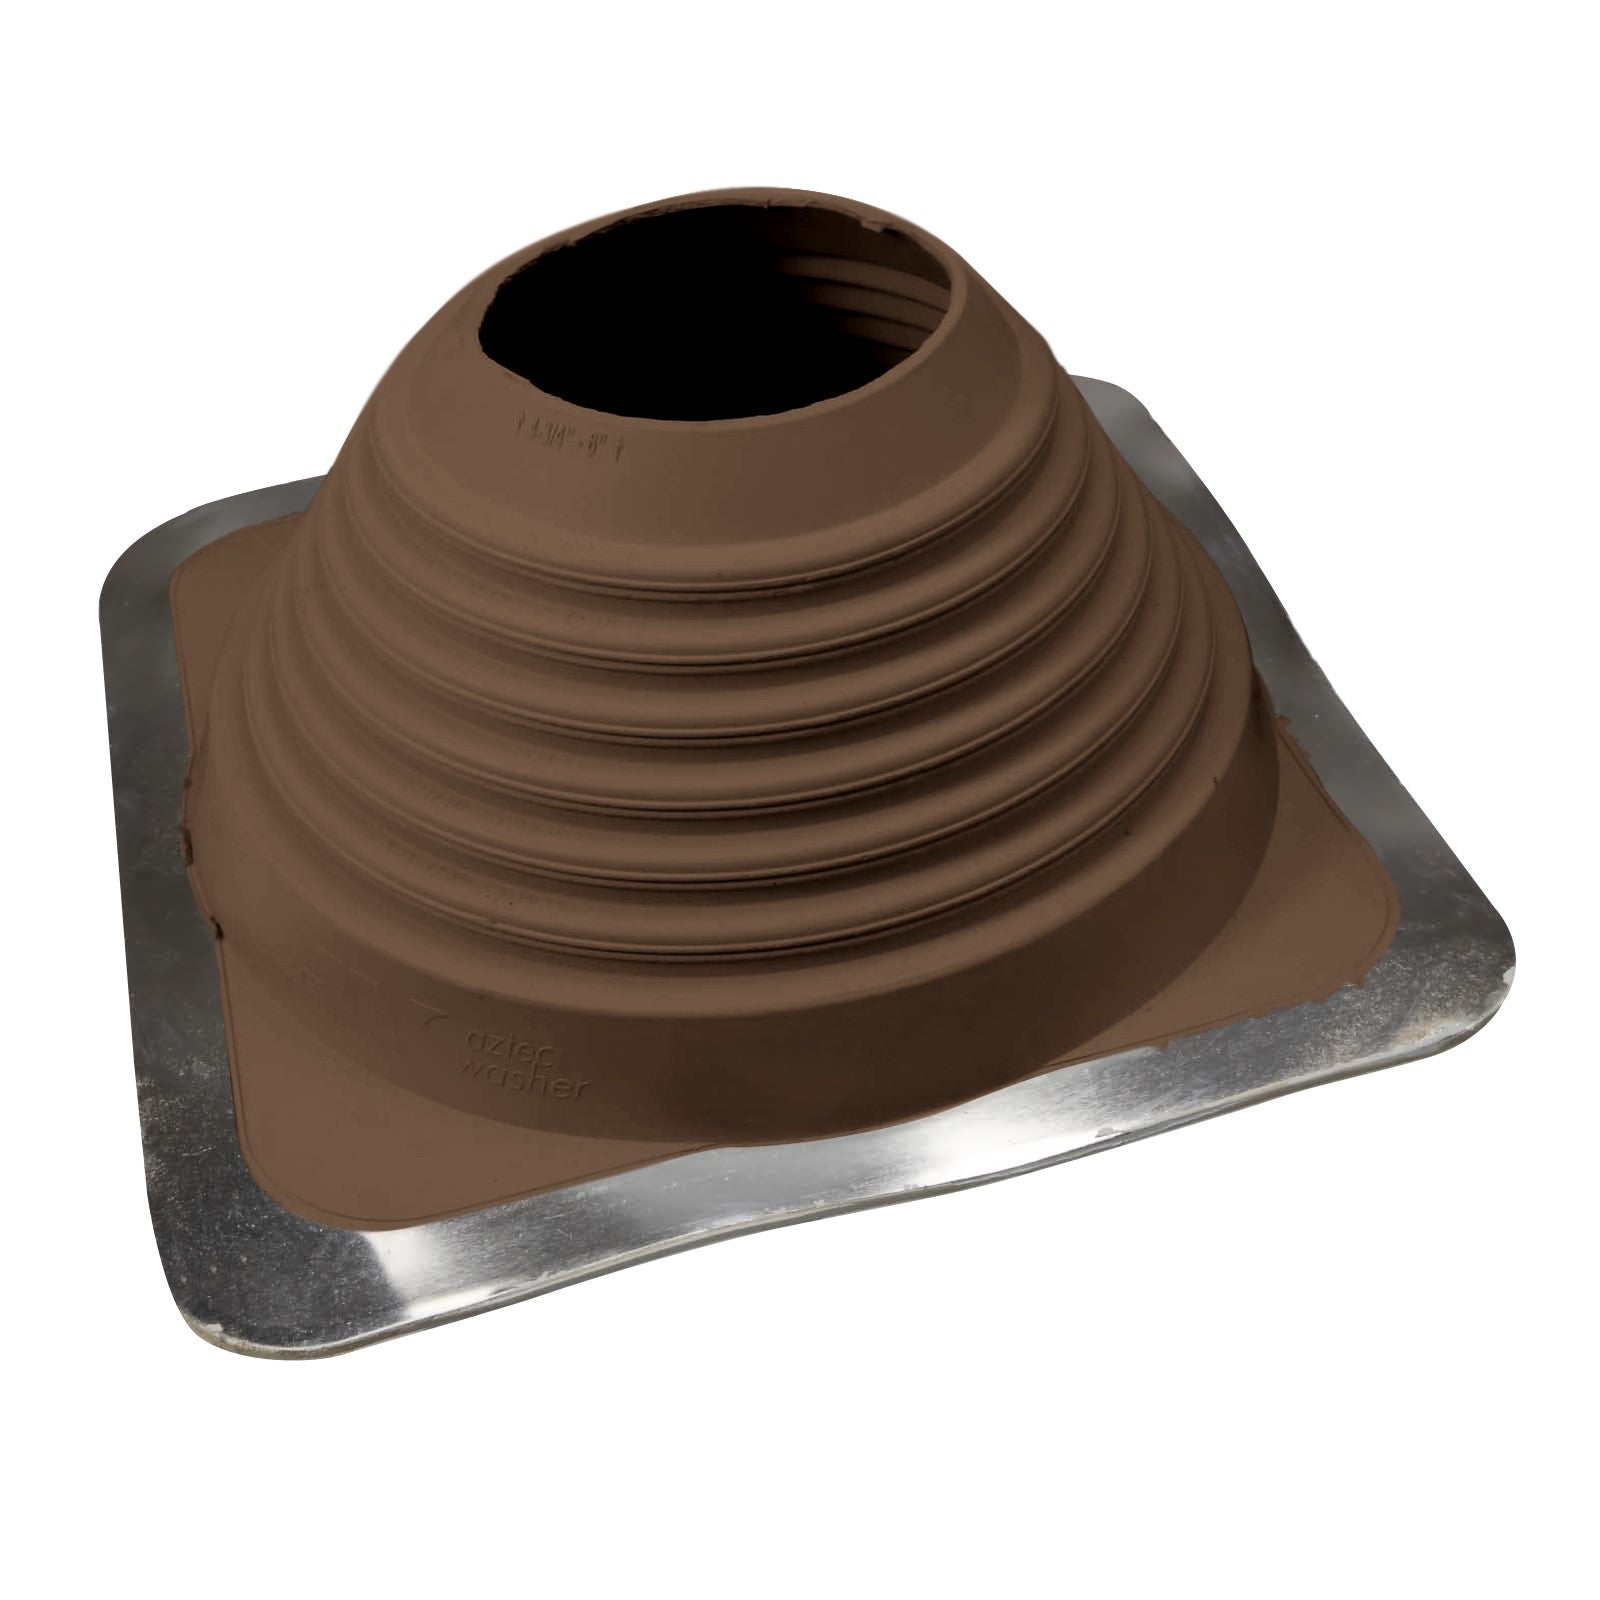 #6 Roofjack Square EPDM Pipe Flashing Boot Brown